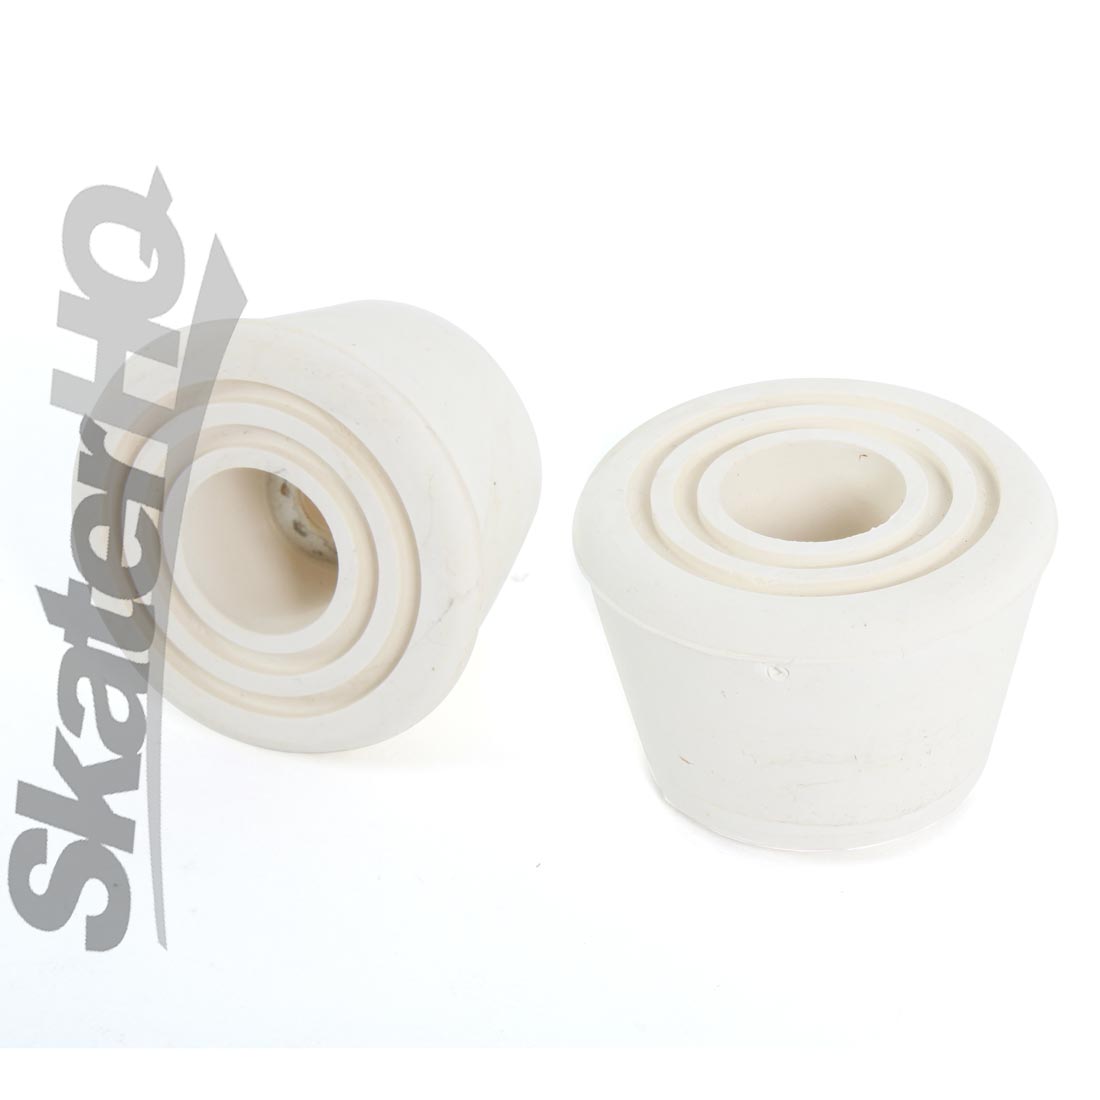 Roller Skate High Bell Stoppers - White Roller Skate Hardware and Parts